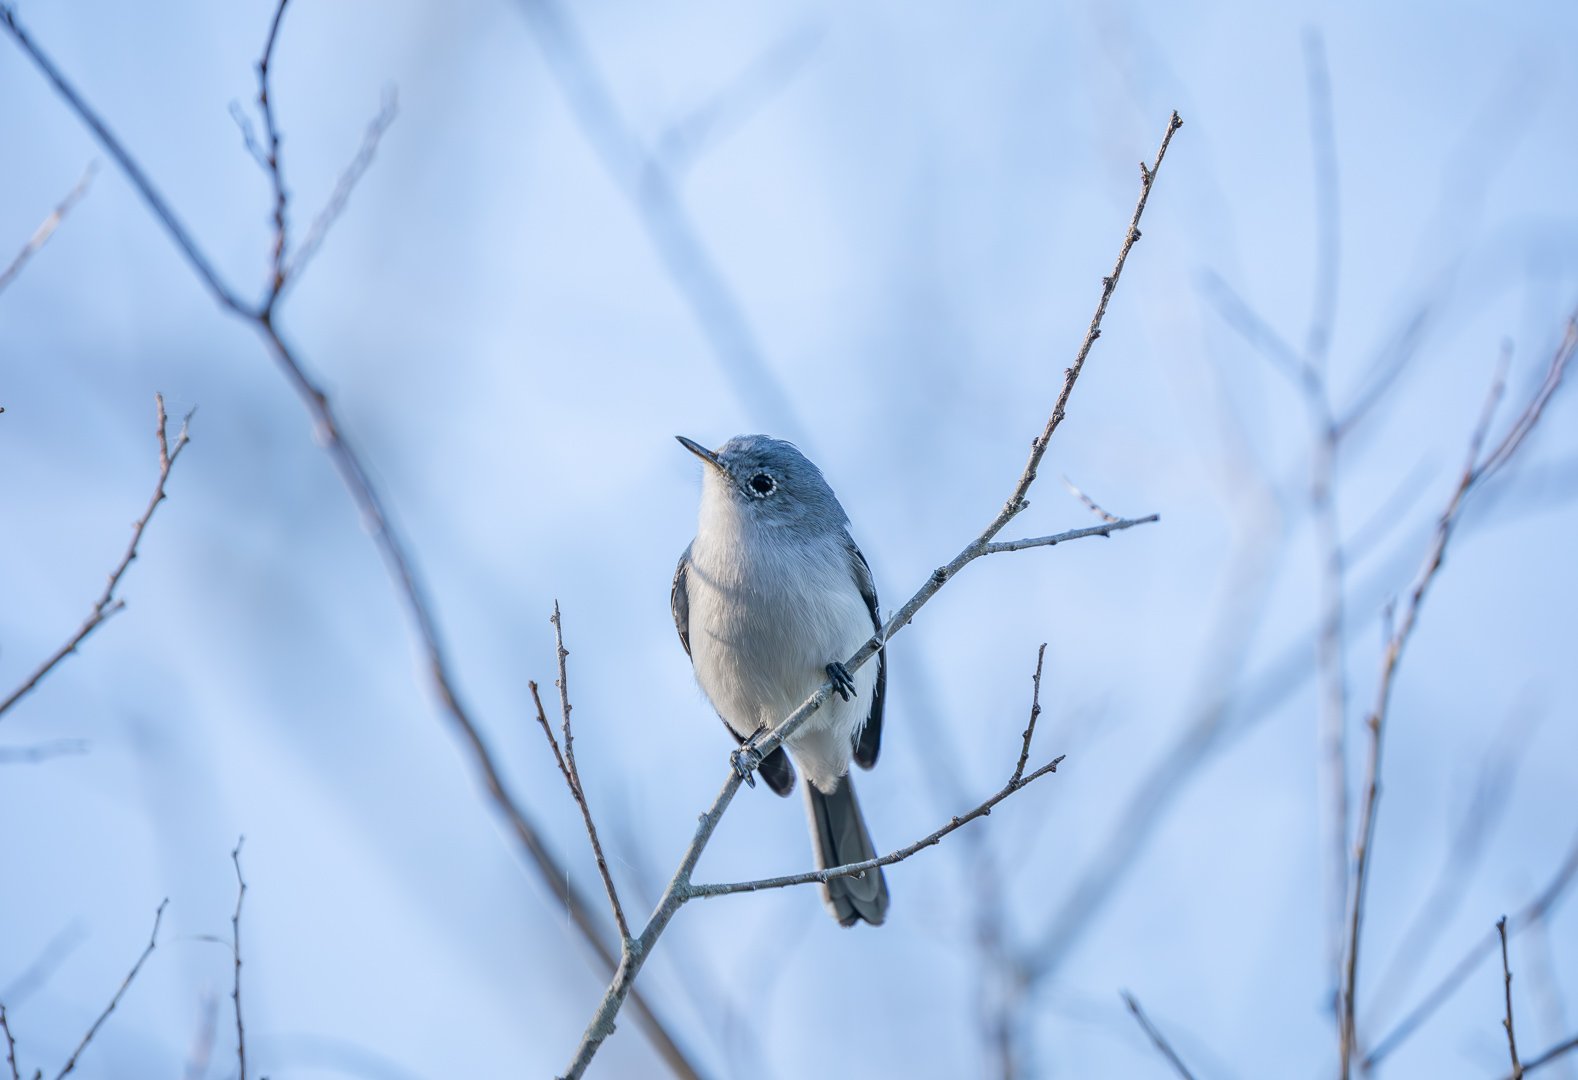   Meet the Blue-gray Gnatcatcher (female/nonbreeding male), also known as the 'Little Mockingbird'.   